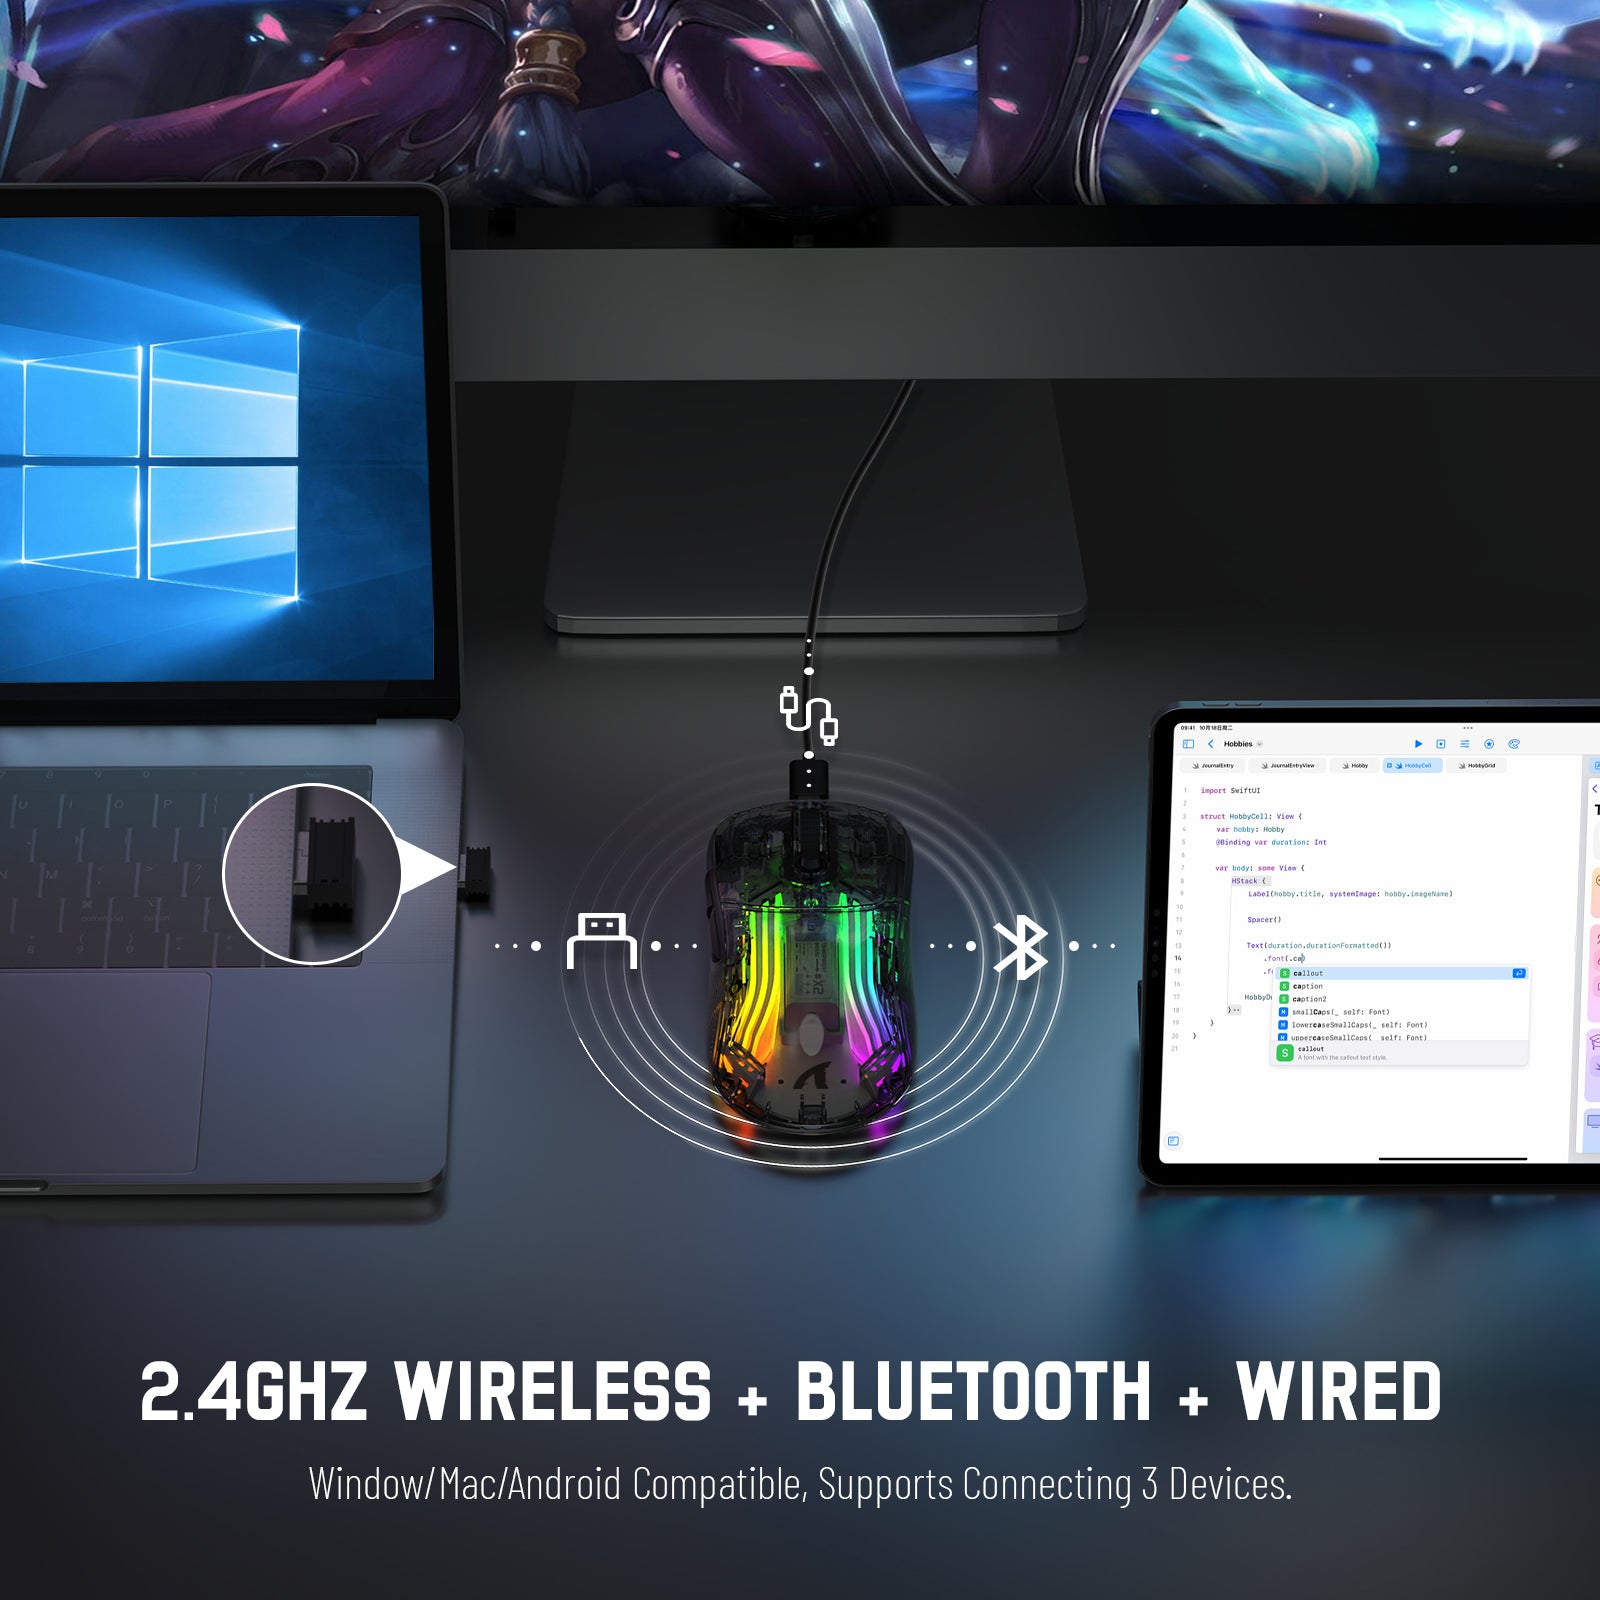 ATTACK SHARK X2 Wireless Transparent Gaming Mouse, Tri-Mode(2.4Ghz, Bluetooth 5.0, USB C Wired), PixArt 3212-RGB Backlit-2400DPI